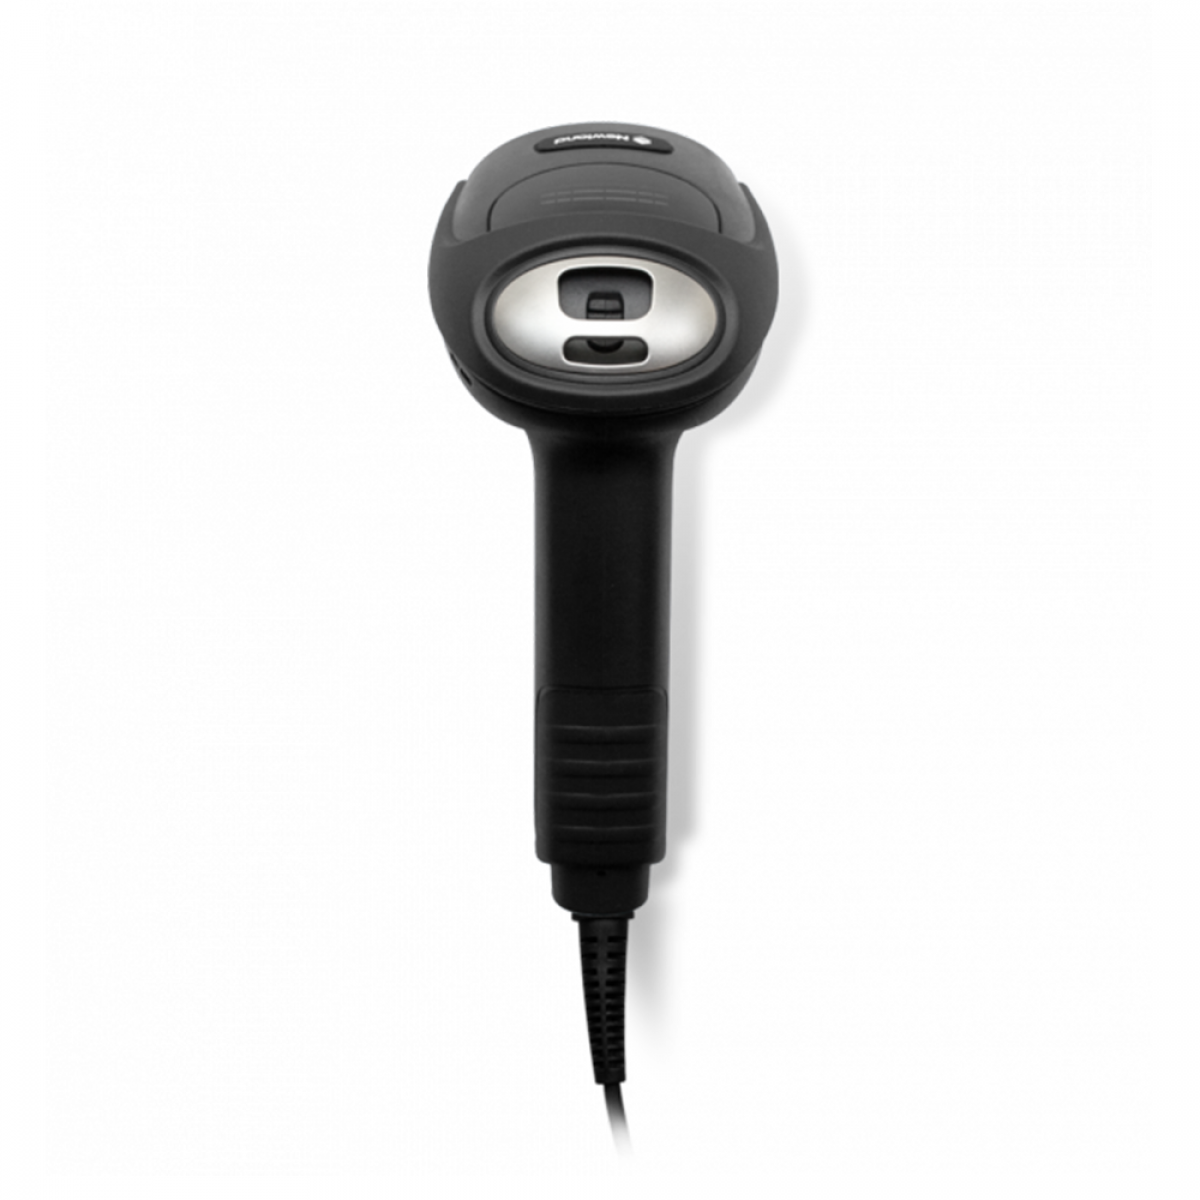 Newland HR52 Bonito Duo 1D & 2D barcode scanner